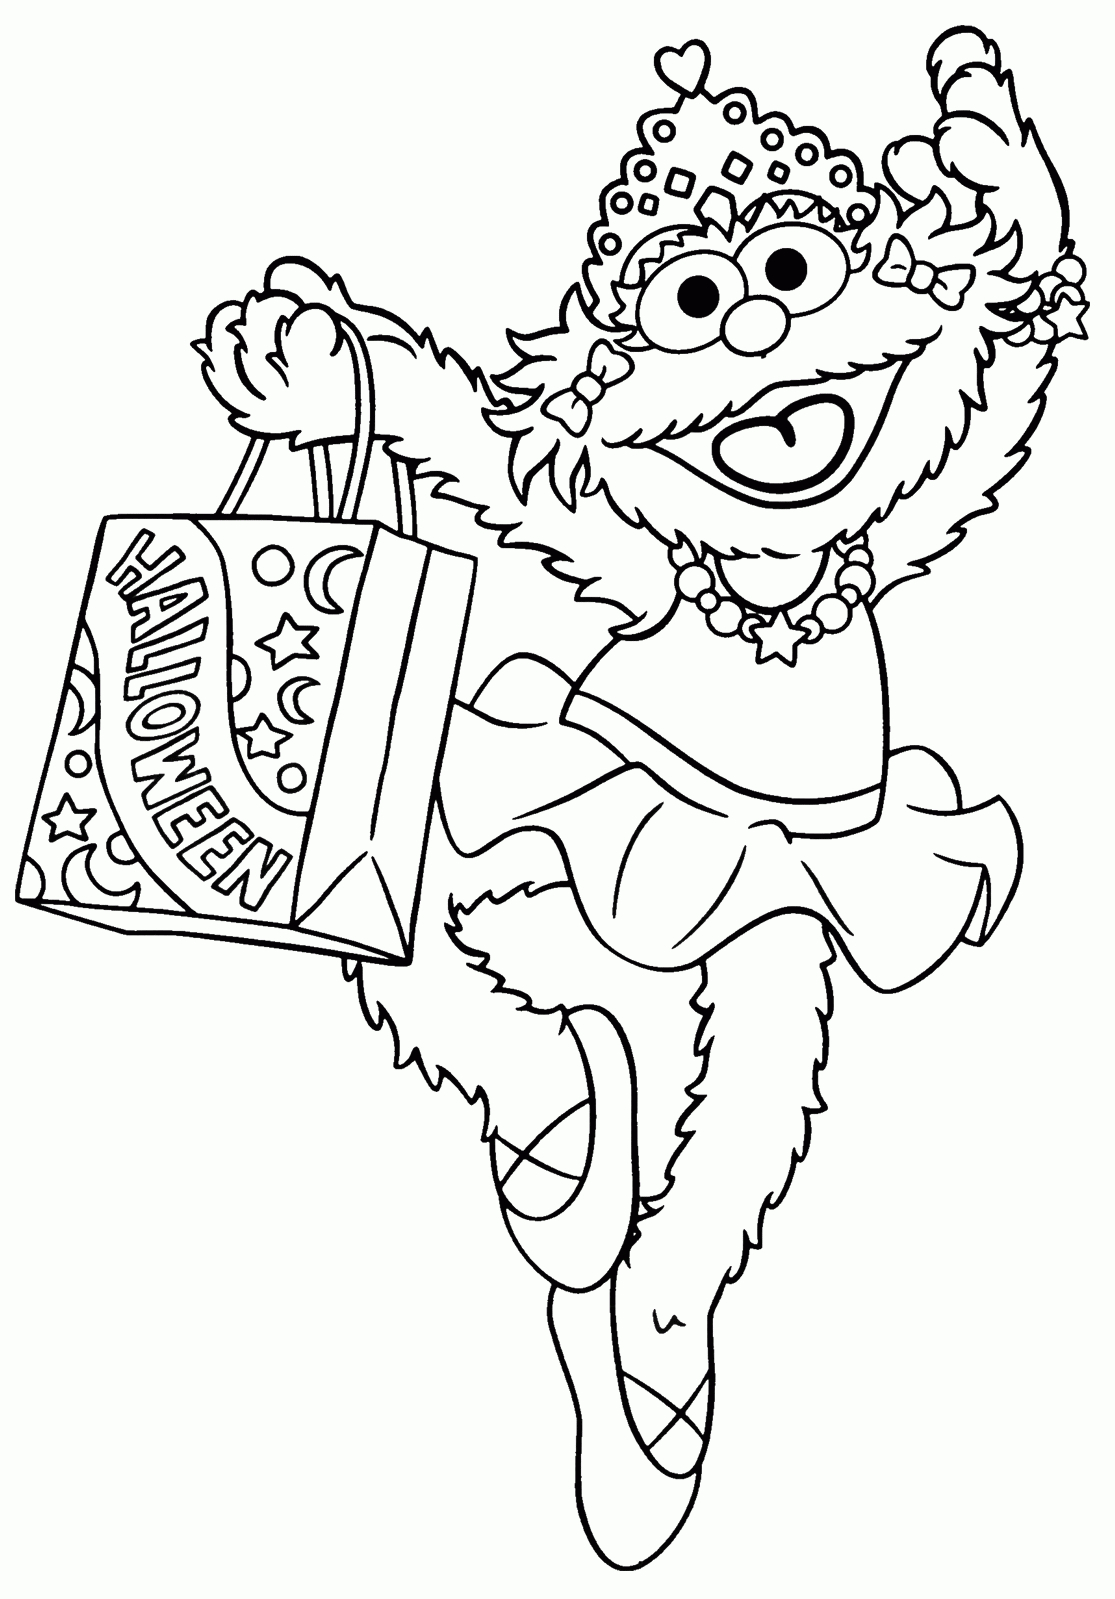 Free Sesame Street Coloring Page Best Friends Free Printable - Free Printable Sesame Street Coloring Pages